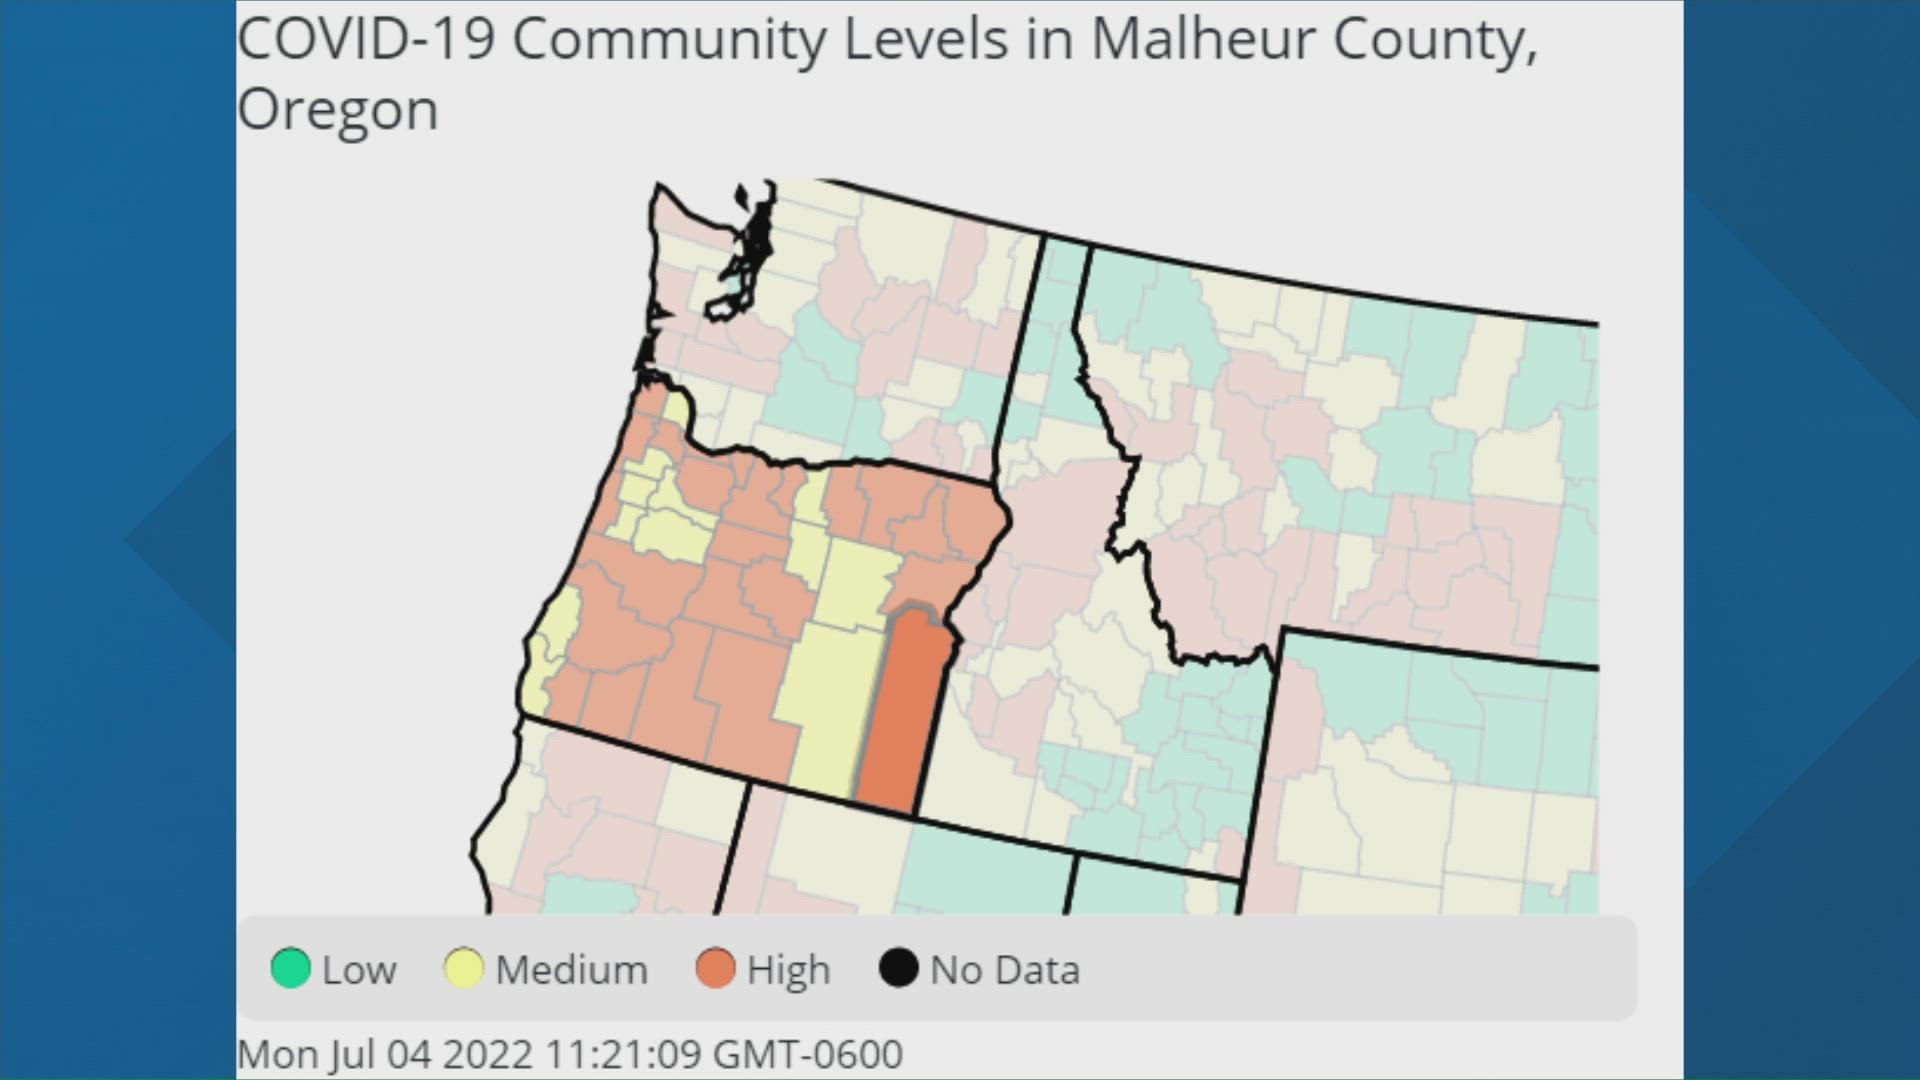 "The SARS-CoV-2 wastewater concentration results are now as high as they were in January when we had over 1,800 cases reported," Malheur County Health Director said.